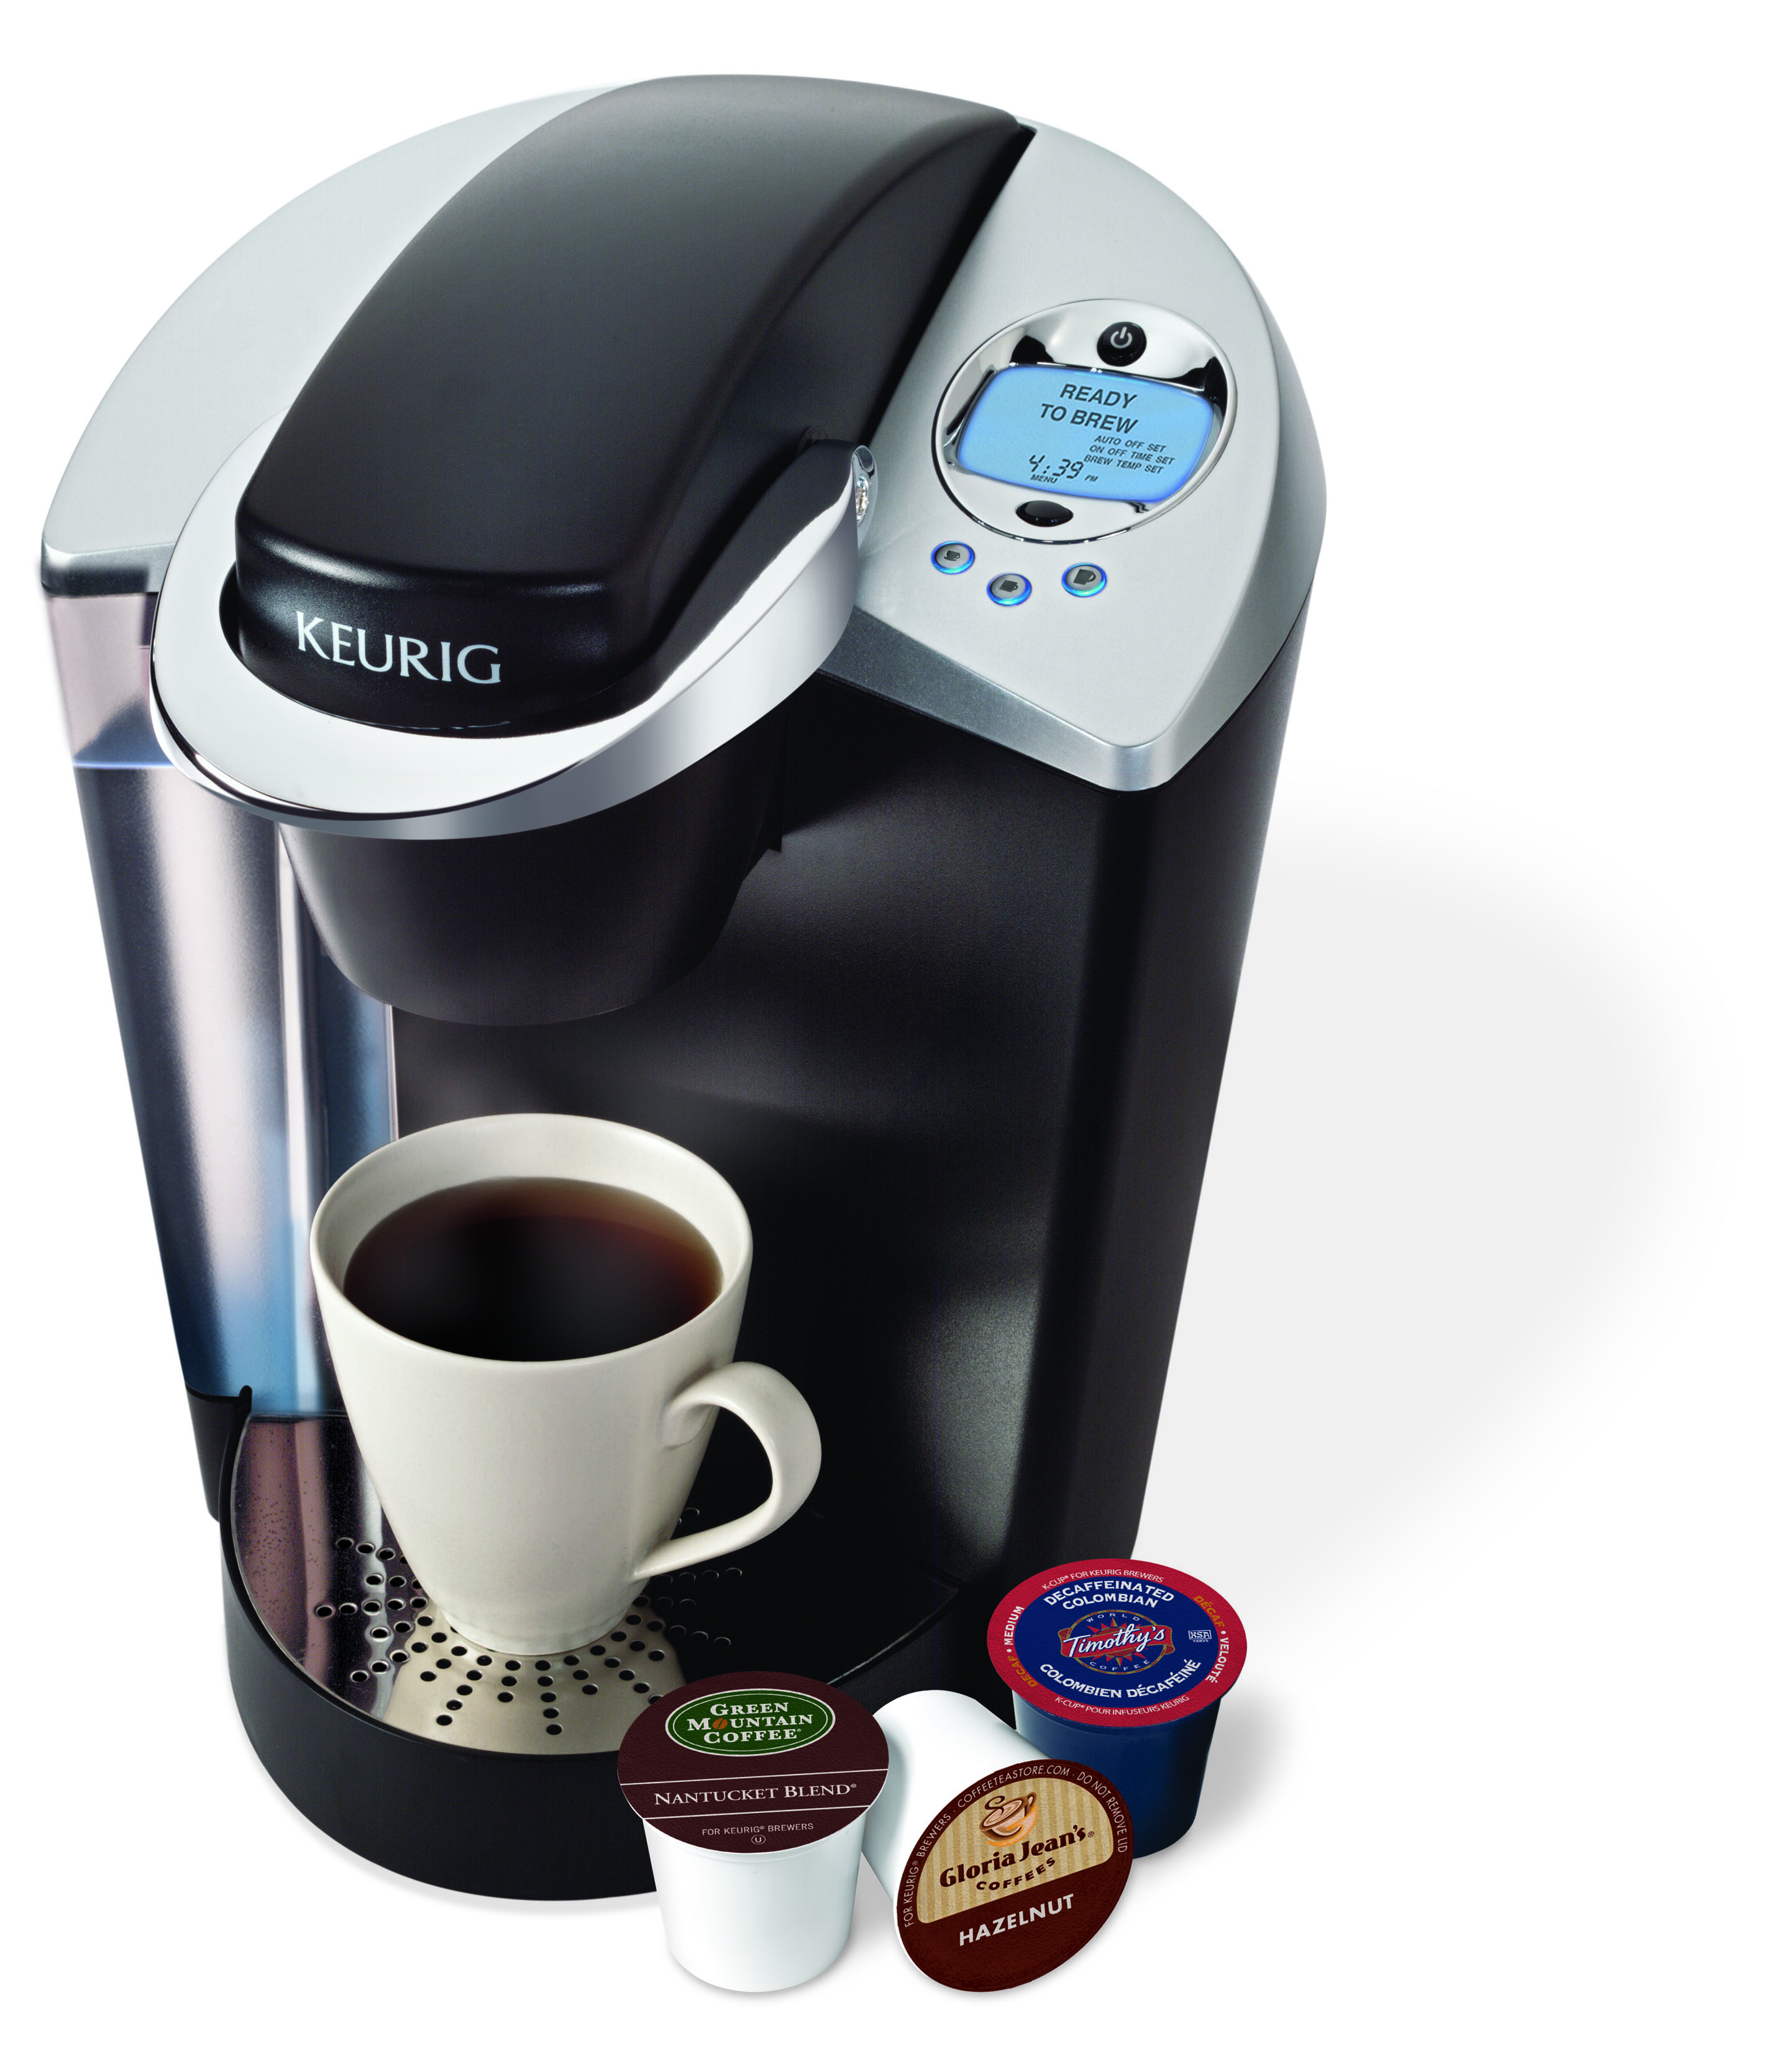 mother-s-day-giveaway-keurig-b60-special-edition-brewer-ended-koupon